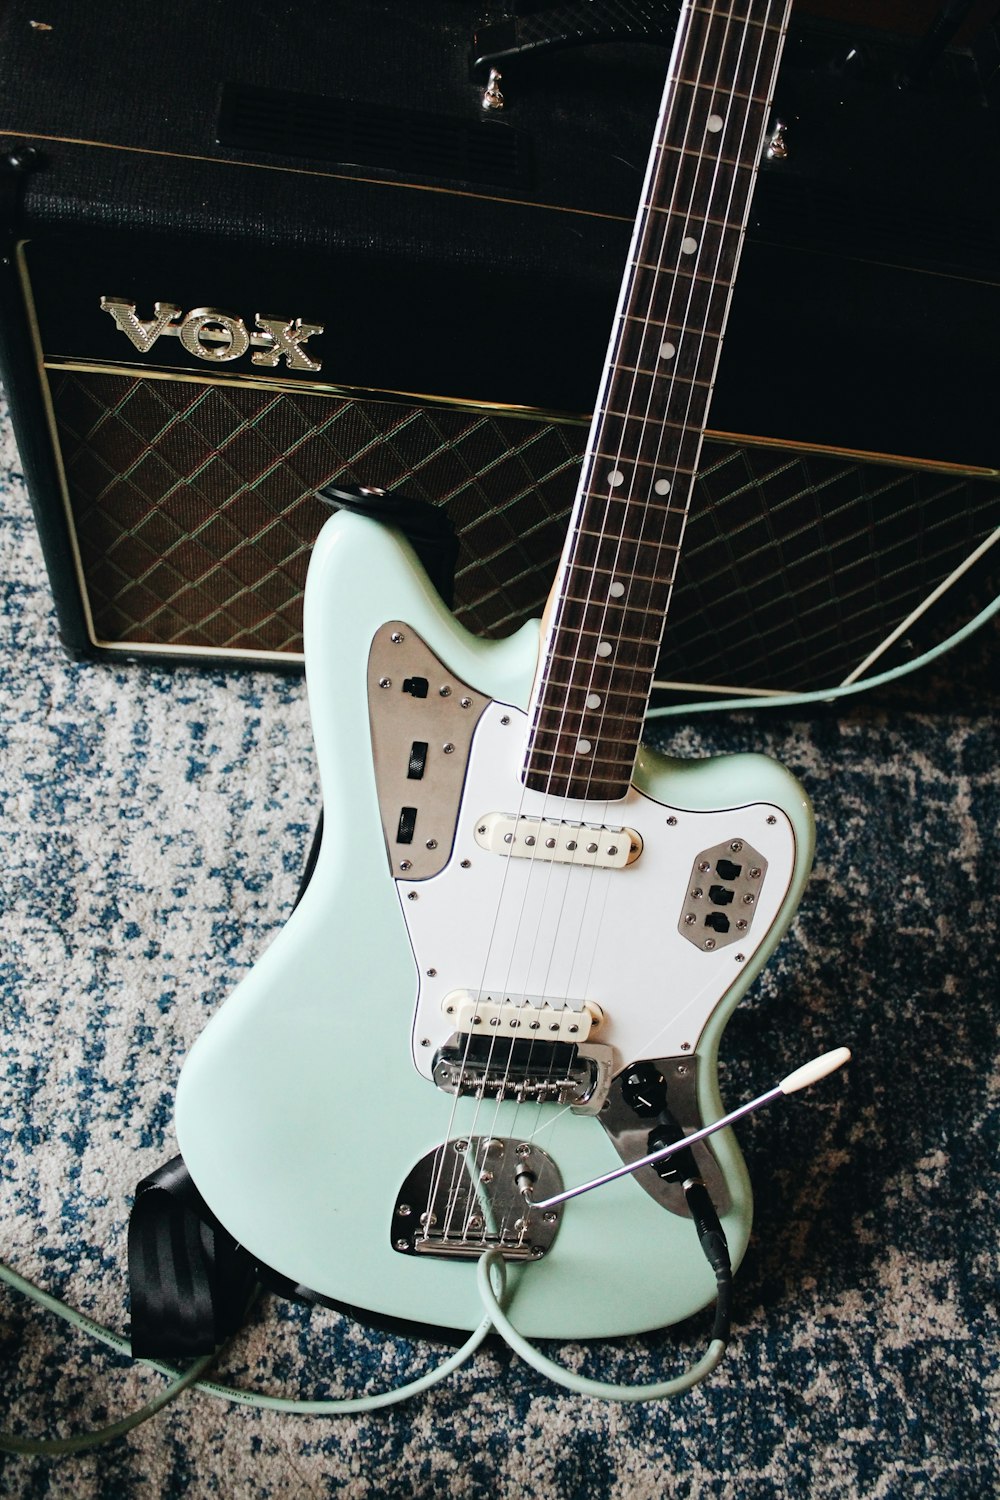 teal and white electric guitar near amplifier